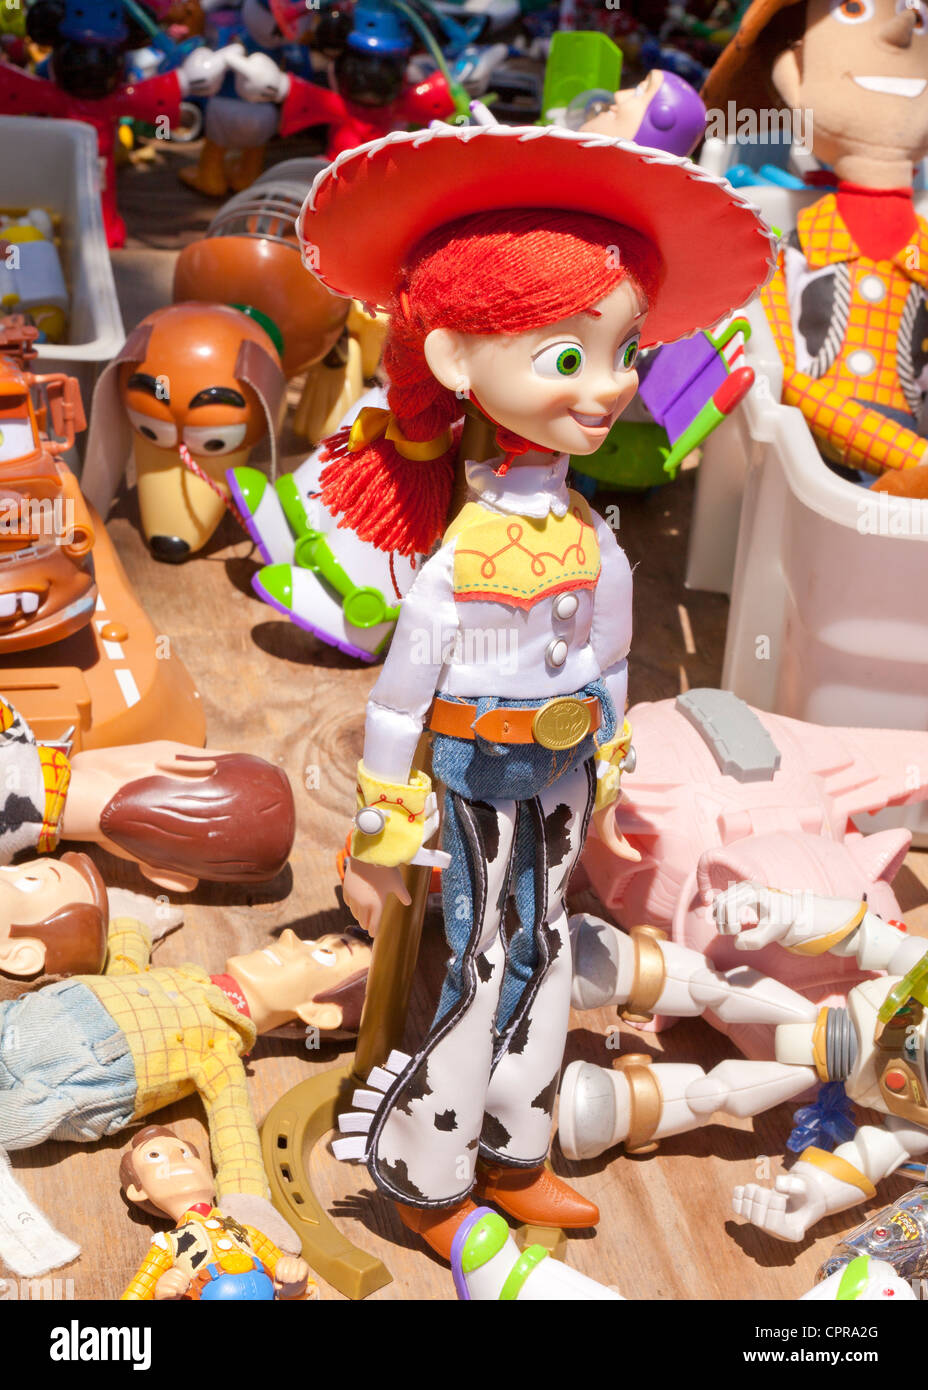 Used toy display at a flea market Stock Photo